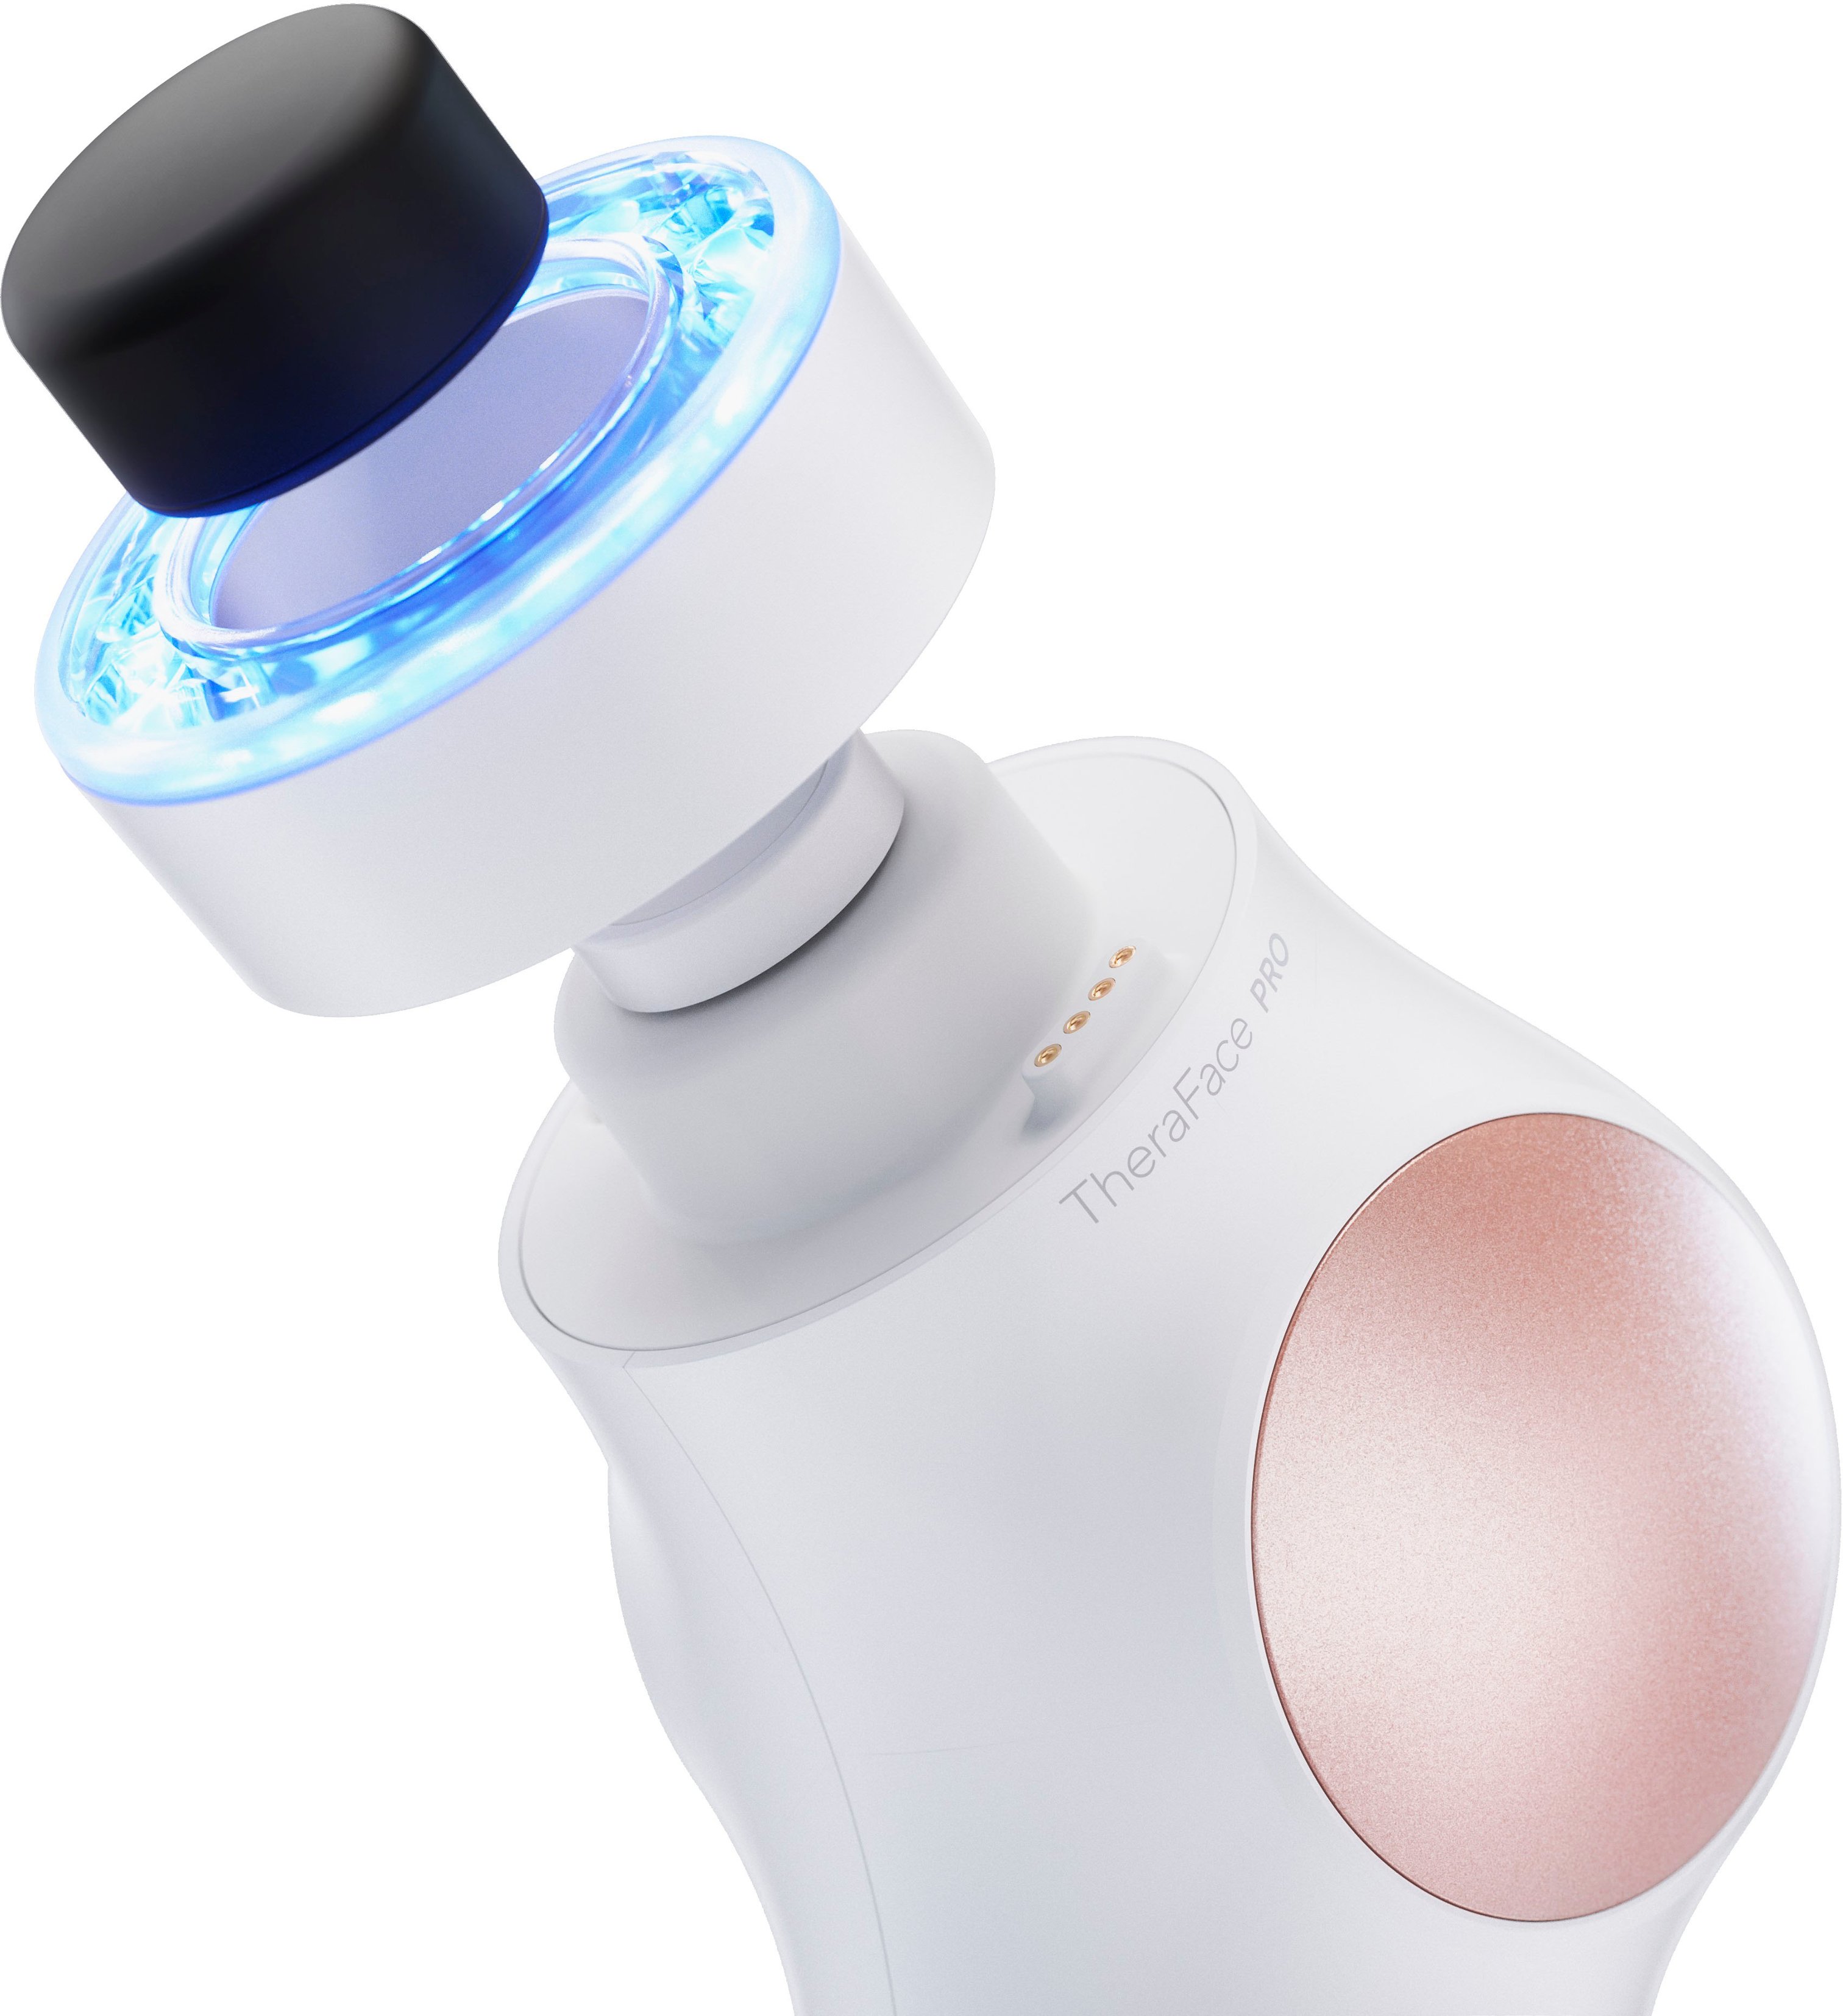 Back View: Therabody - TheraFace PRO 6-in-1 Facial Health Device - White